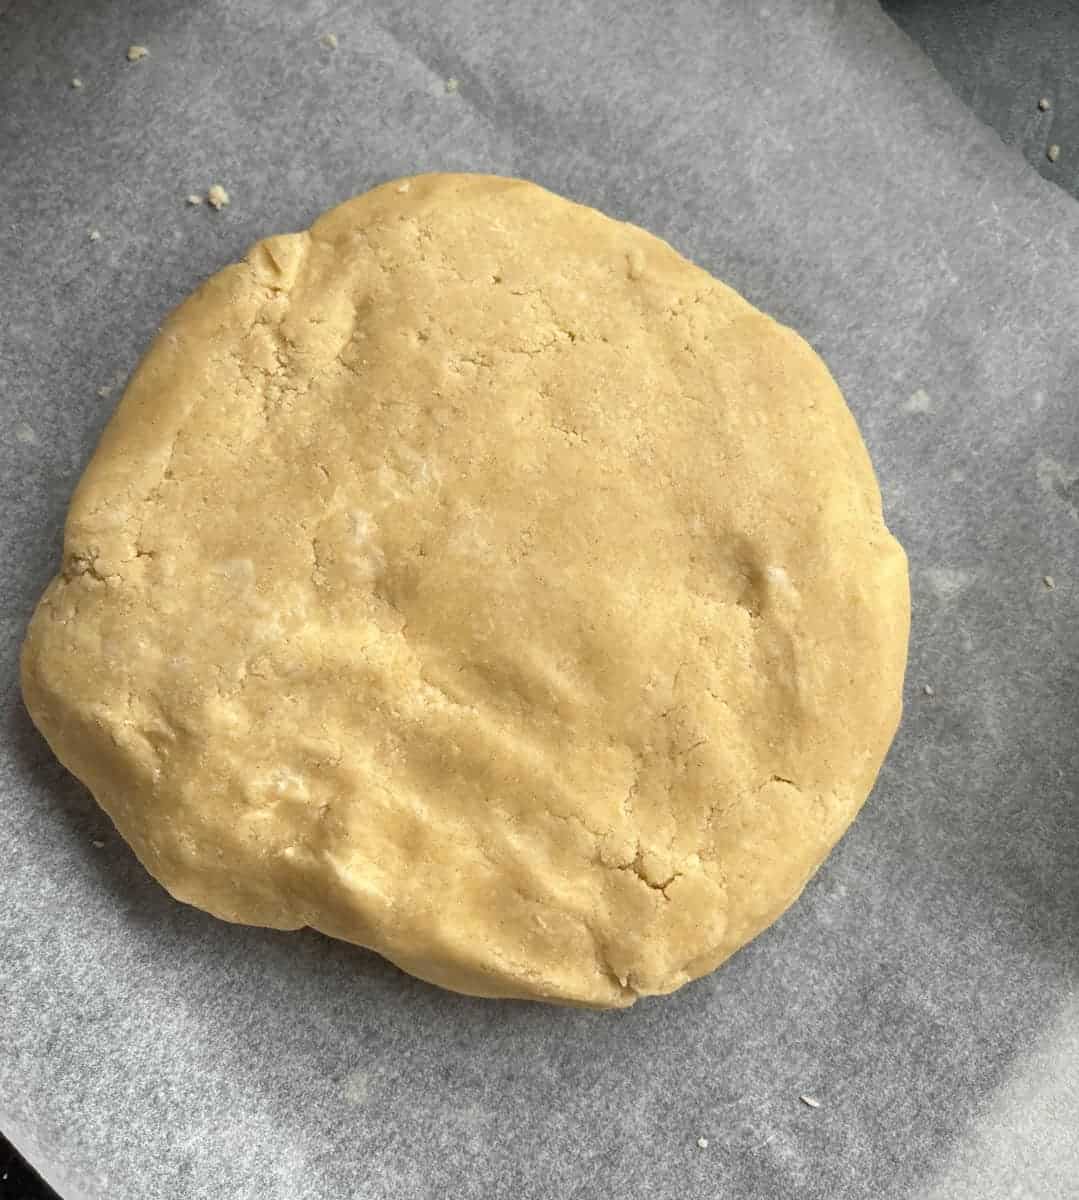 A ball of unbaked pie crust dough on a piece of baking parchment.